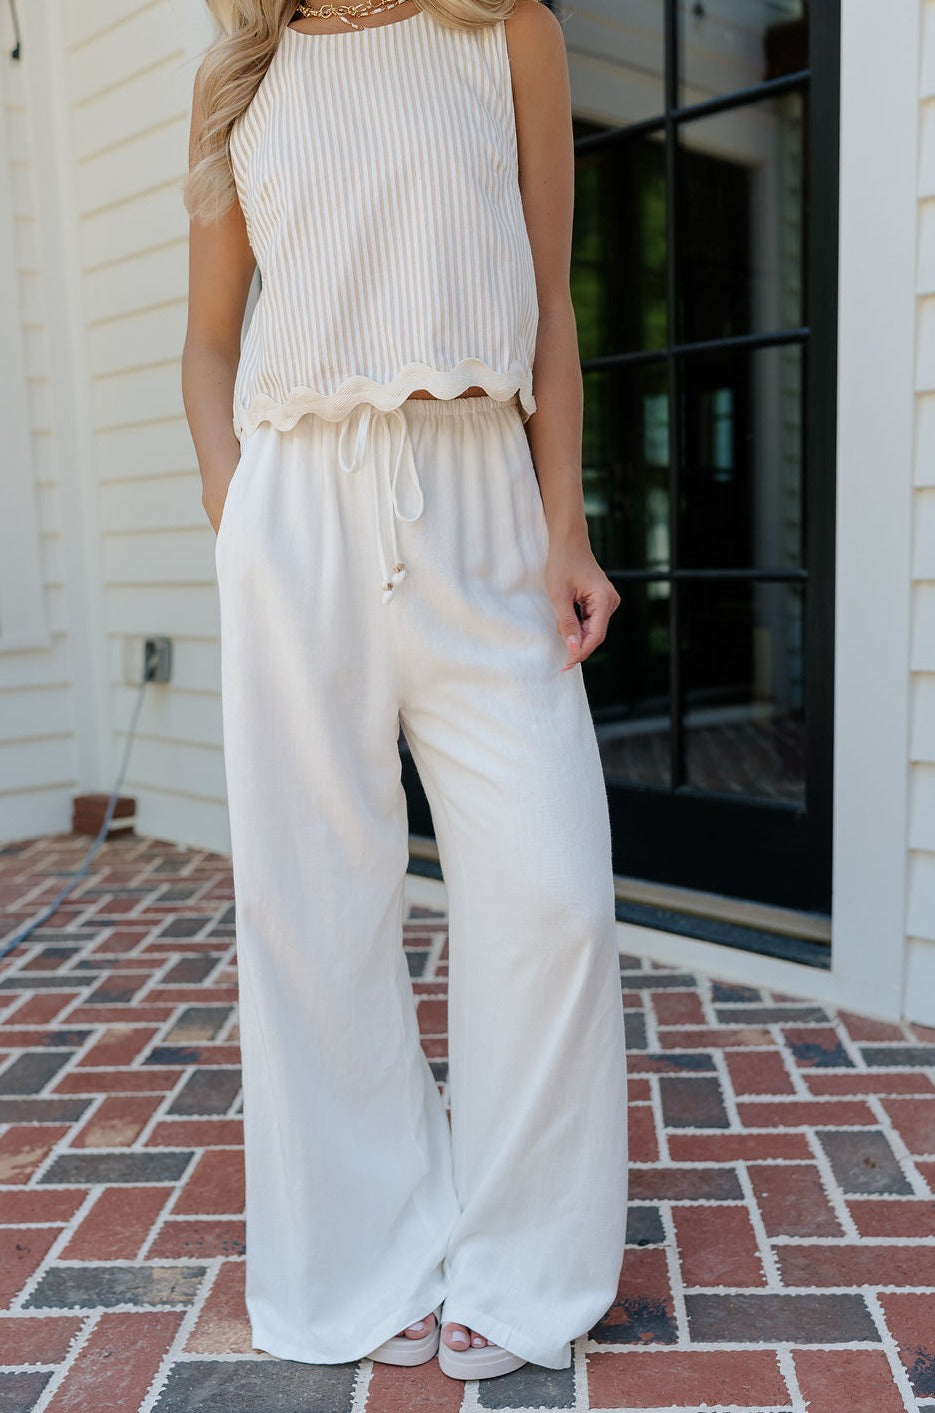 Front view of female model wearing the Alice Off White Wide Leg Drawstring Pants which features Off White Lightweight Linen Fabric, Off White Lining, Wide Pant Legs, Side Pockets and Elastic Waistband with Drawstring Tie